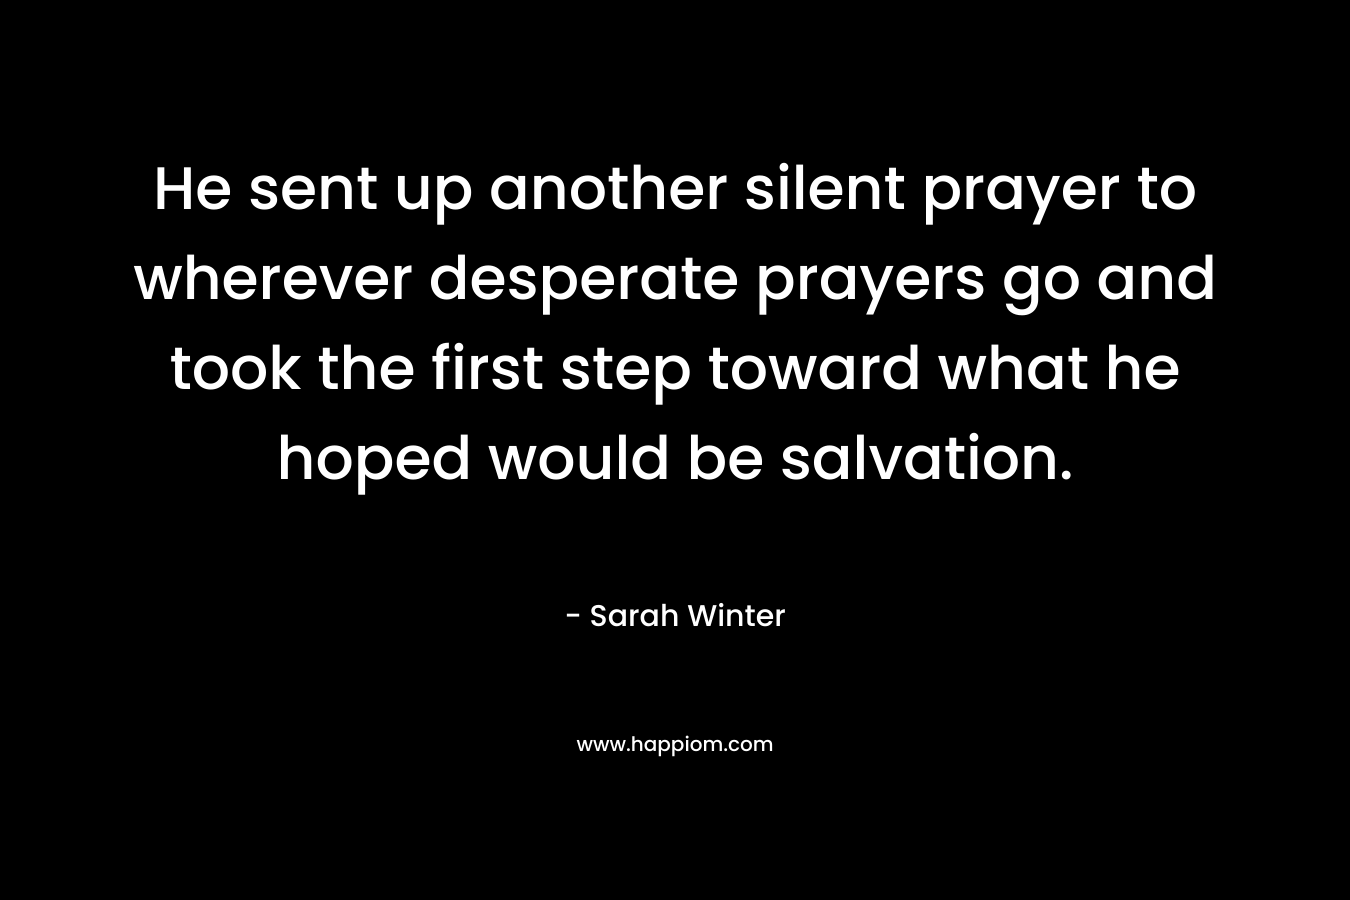 He sent up another silent prayer to wherever desperate prayers go and took the first step toward what he hoped would be salvation.